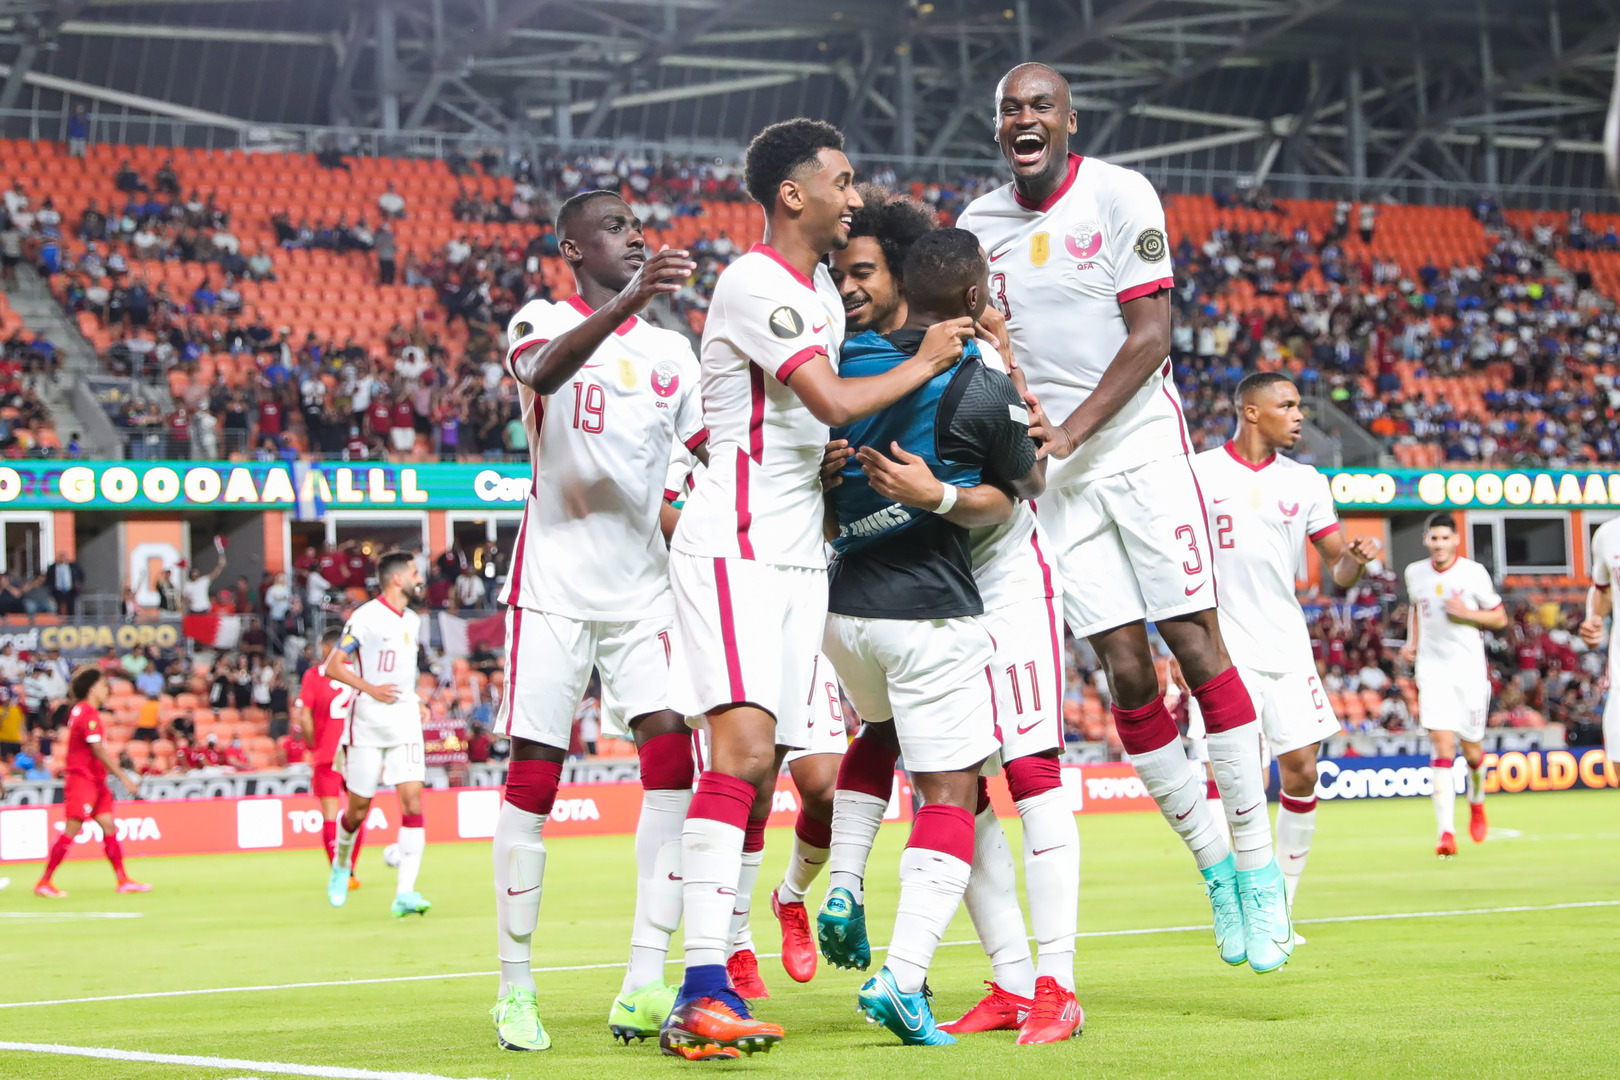 Qatar confident after thrilling Gold Cup debut